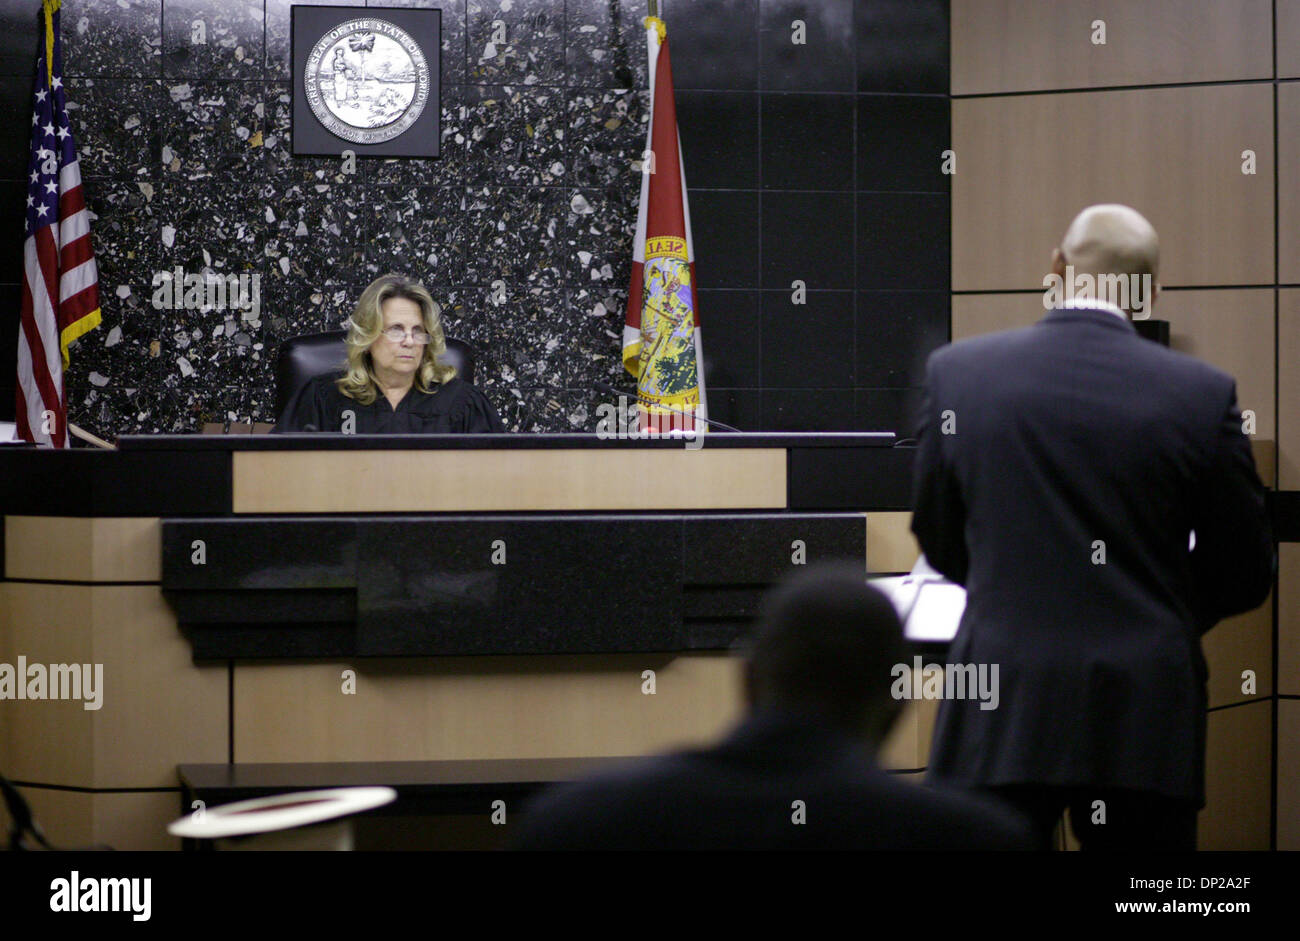 May 24, 2006; West Palm Beach, FL, USA; Judge Karen Martin listens to plaintiff attorney Patrick Cousins Wednesday afternoon in a paternity suit against Kenneth Miller challenging who the father of Jerrod Miller is. Mandatory Credit: Photo by Greg Lovett/Palm Beach Post/ZUMA Press. (©) Copyright 2006 by Palm Beach Post Stock Photo